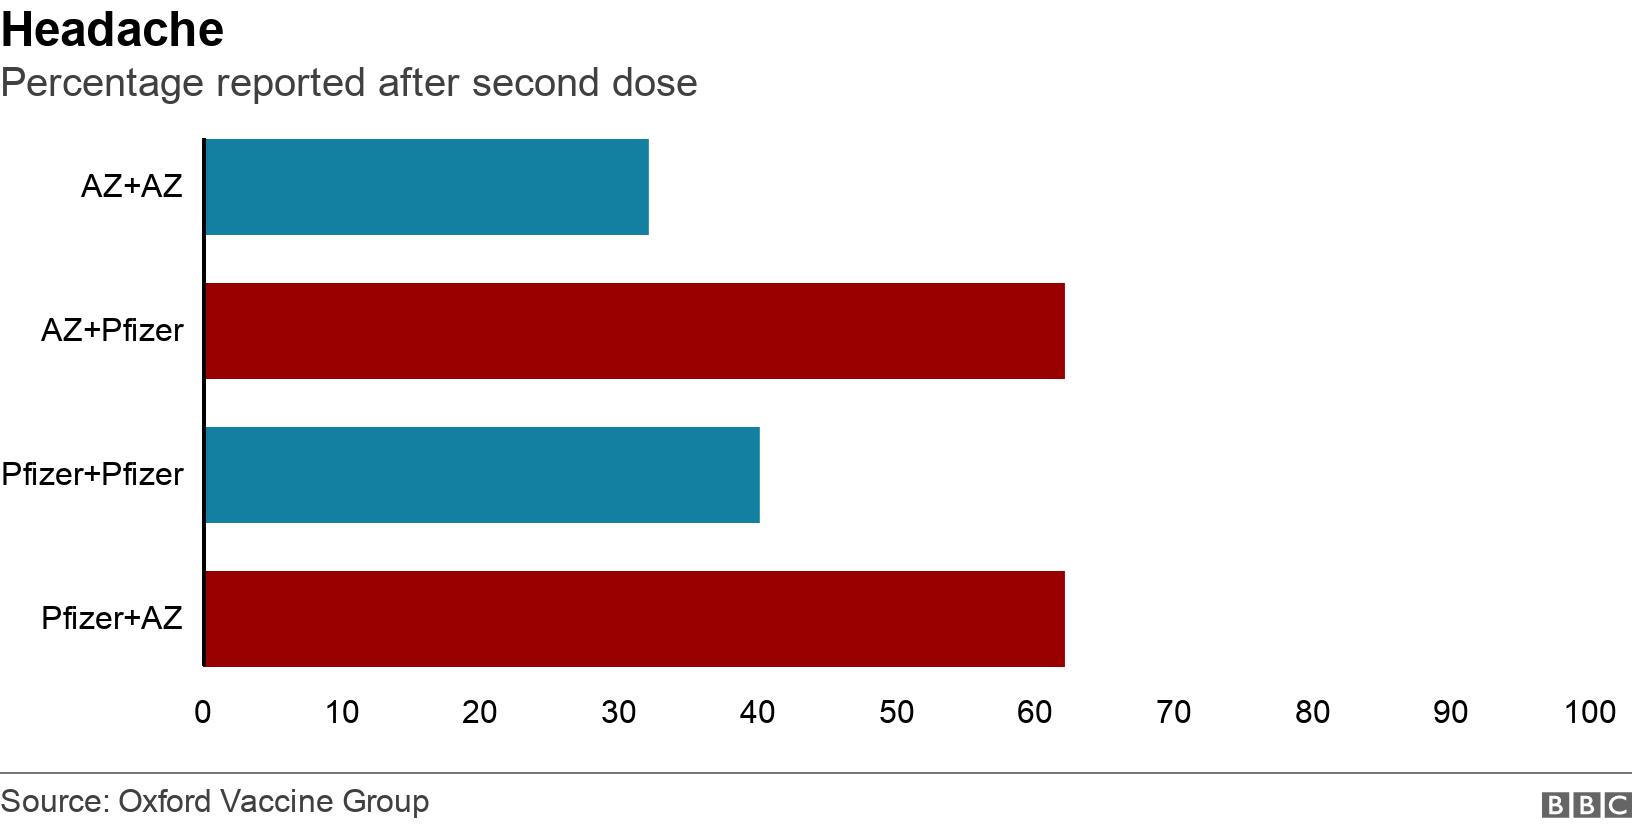 Headache. Percentage reported after second dose. Data showing percentage of people who reported fatigue symptoms after second dose .